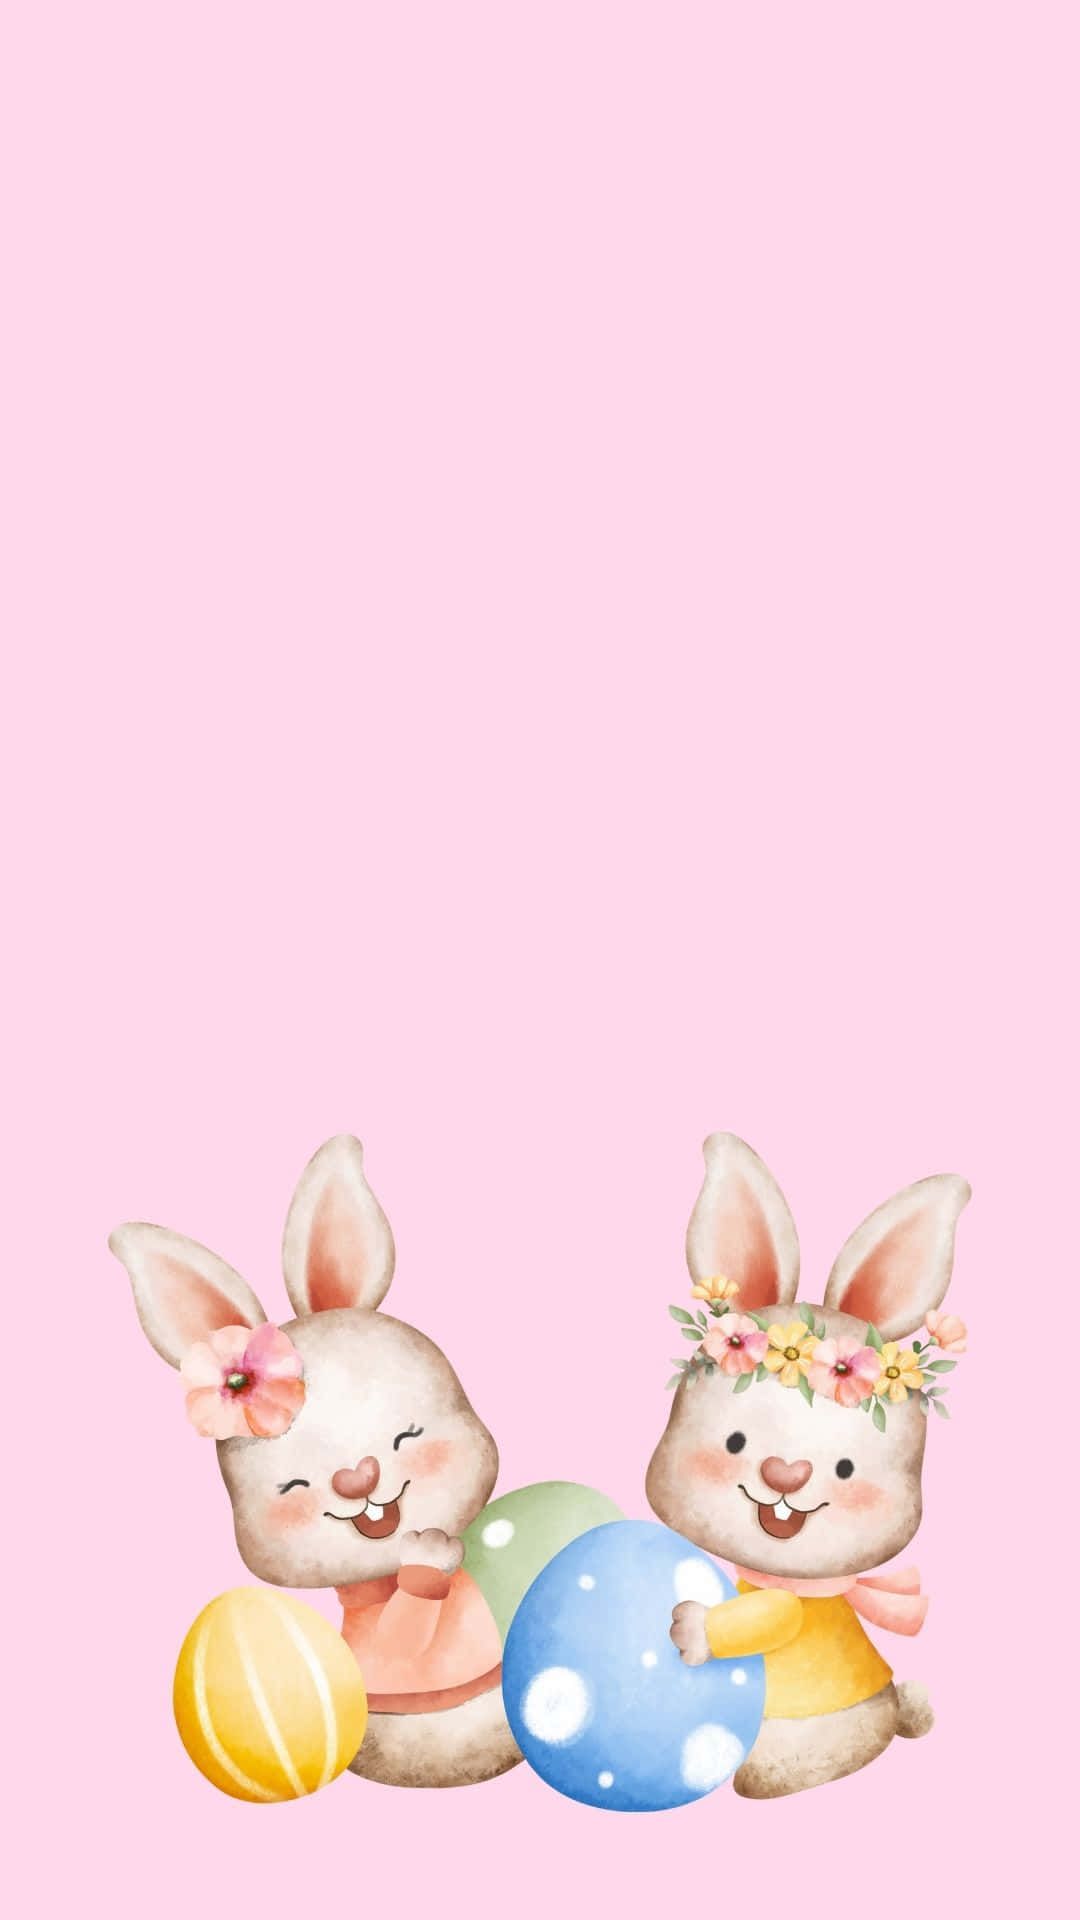 Free Easter Wallpapers Bunny  Egg Downloads for Desktop Android iPhone